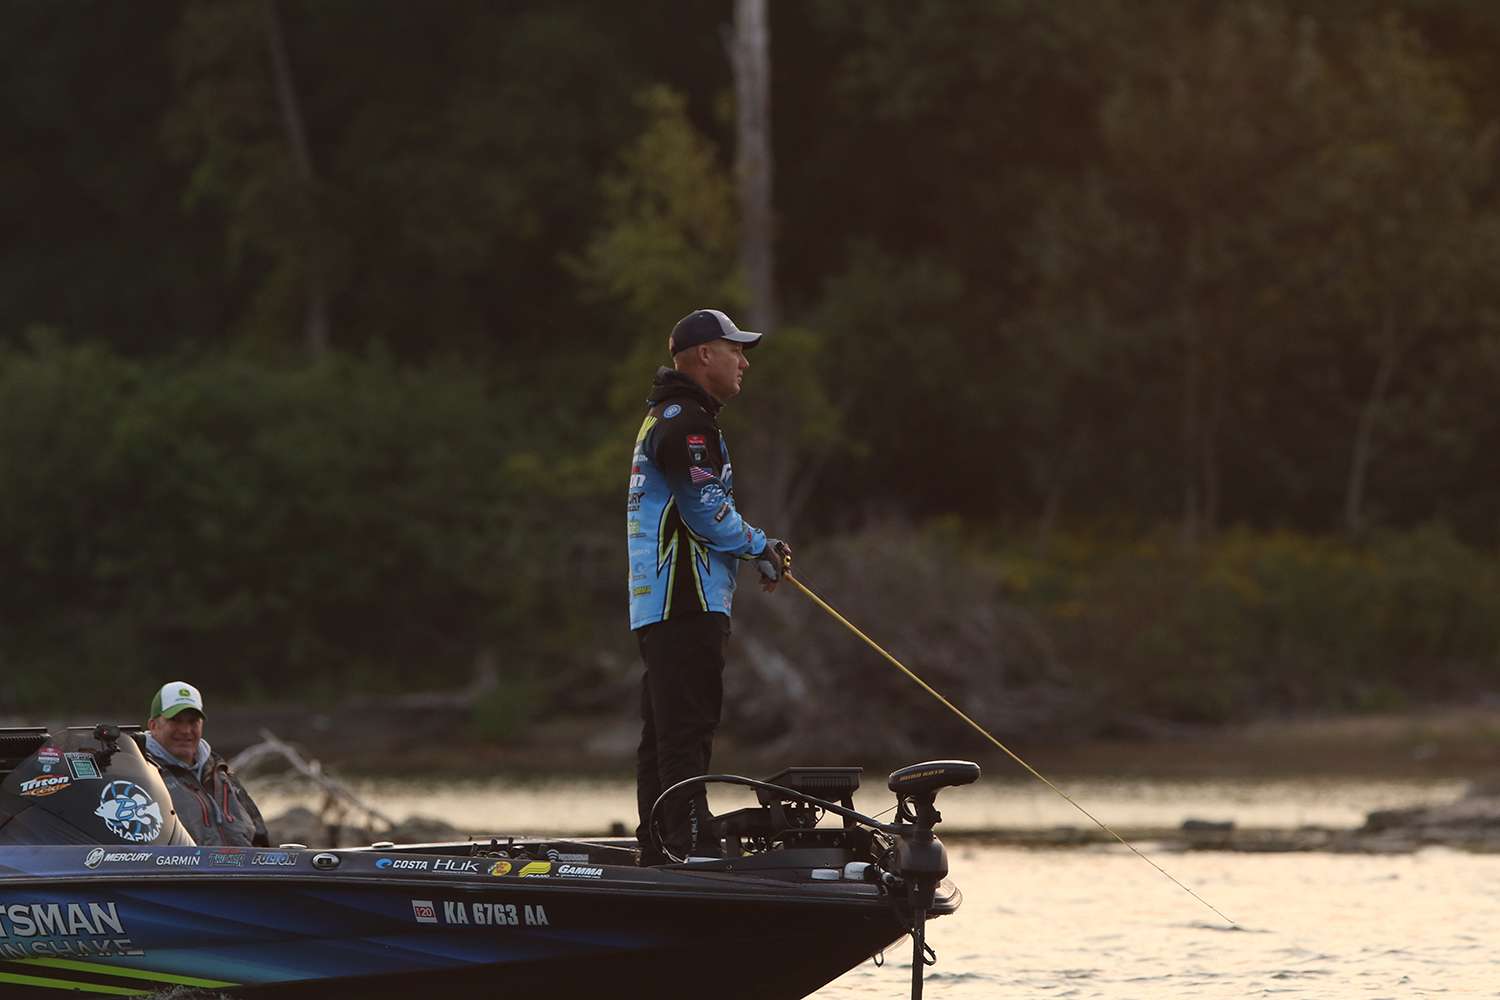 Watch Day 2 unfold at the 2018 Huk Bassmaster Elite at St. Lawrence River presented by Black Velvet.